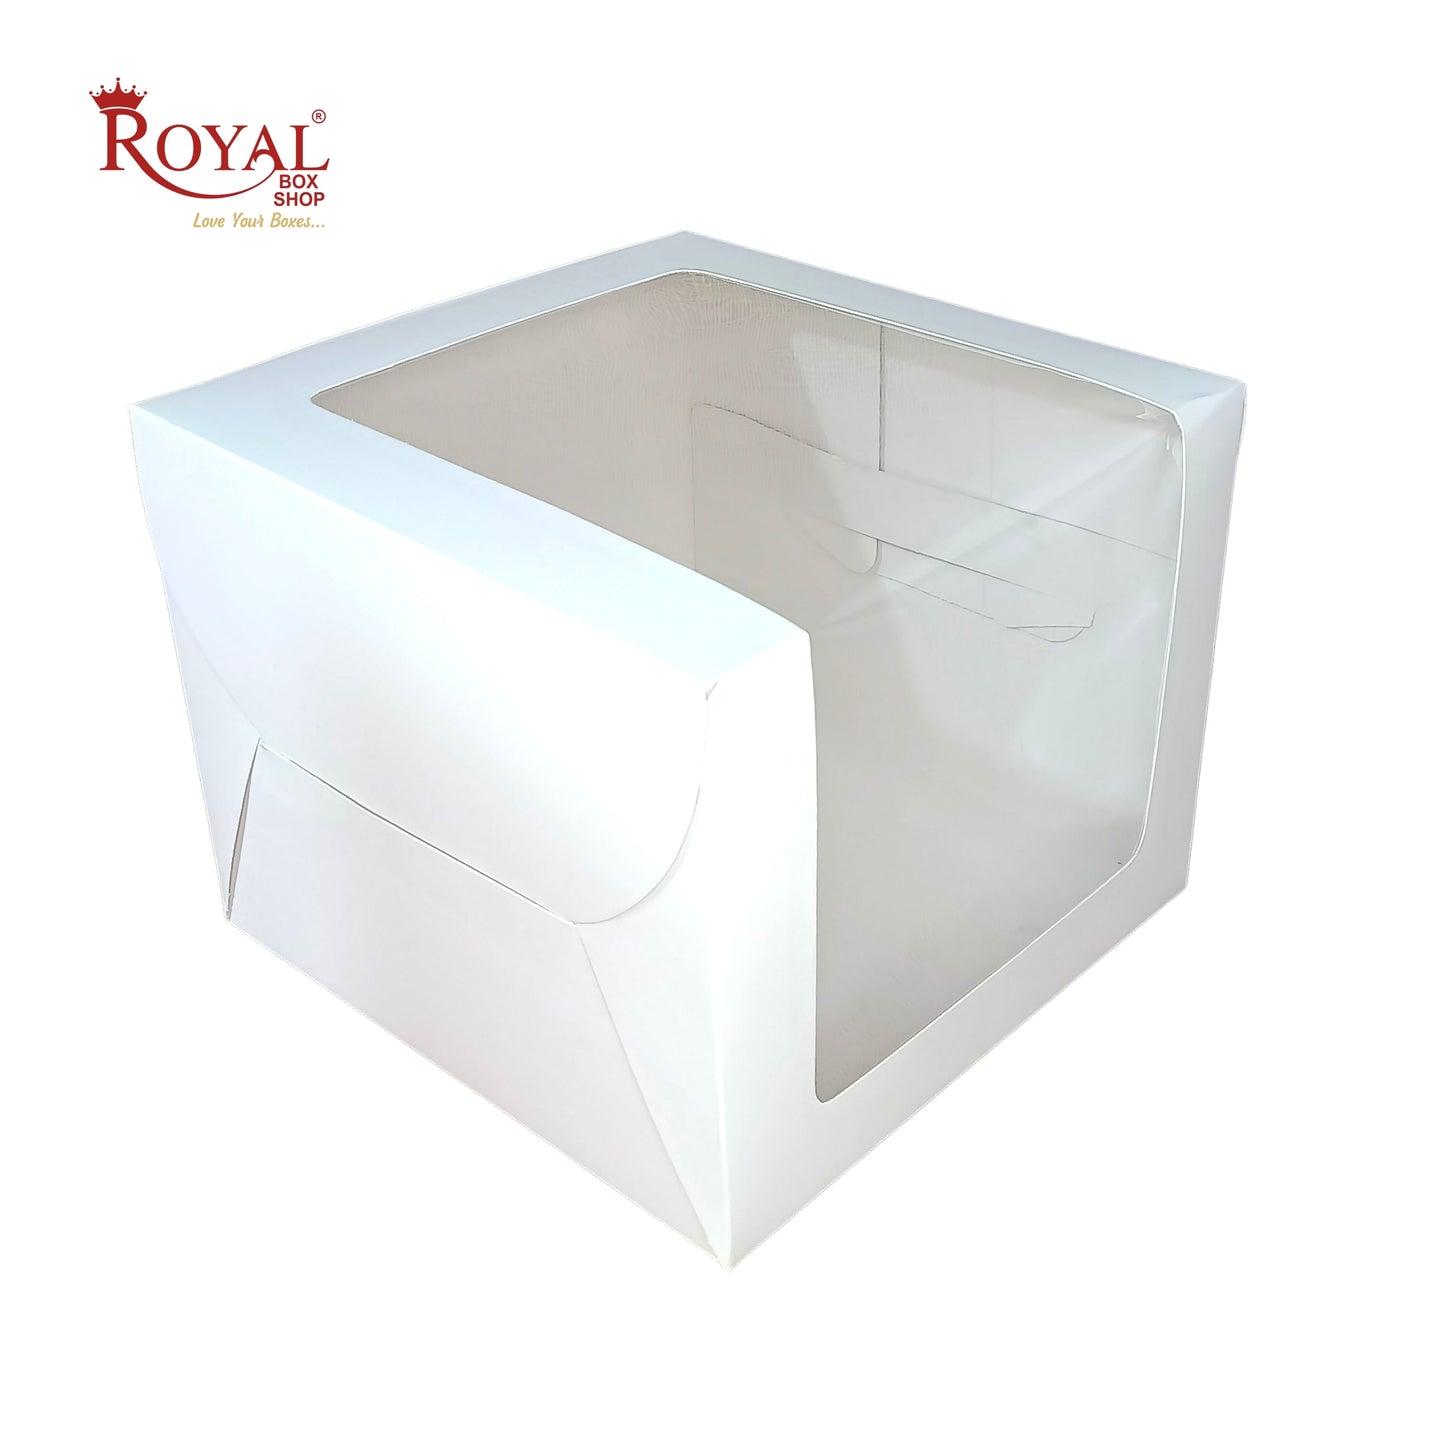 Tall Cake Box L-shape Window - 12"x12"x8"inches - Solid White Color